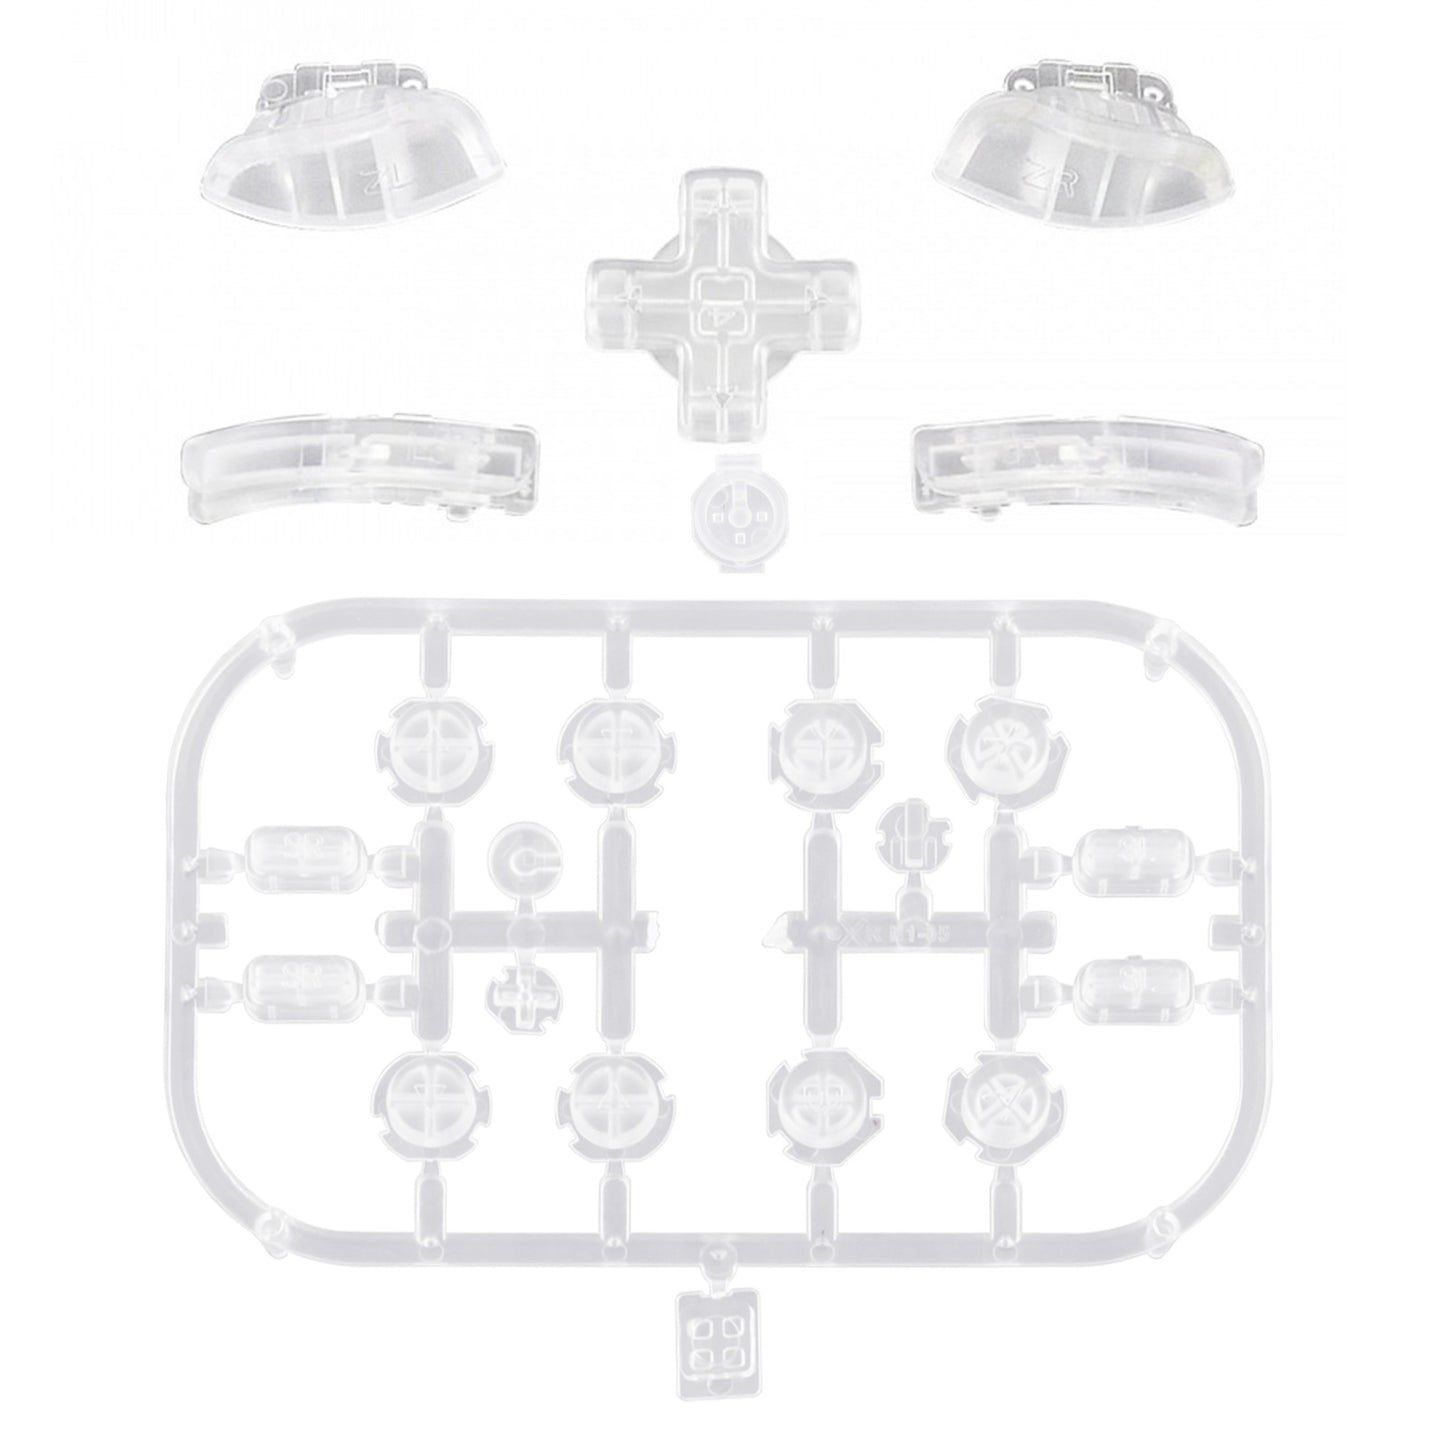 eXtremeRate Dpad Version Replacement Full Set Buttons for Joycon of Switch (D-pad ONLY Fits for eXtremeRate D-pad Shell for Joycon) - Transparent Clear eXtremeRate